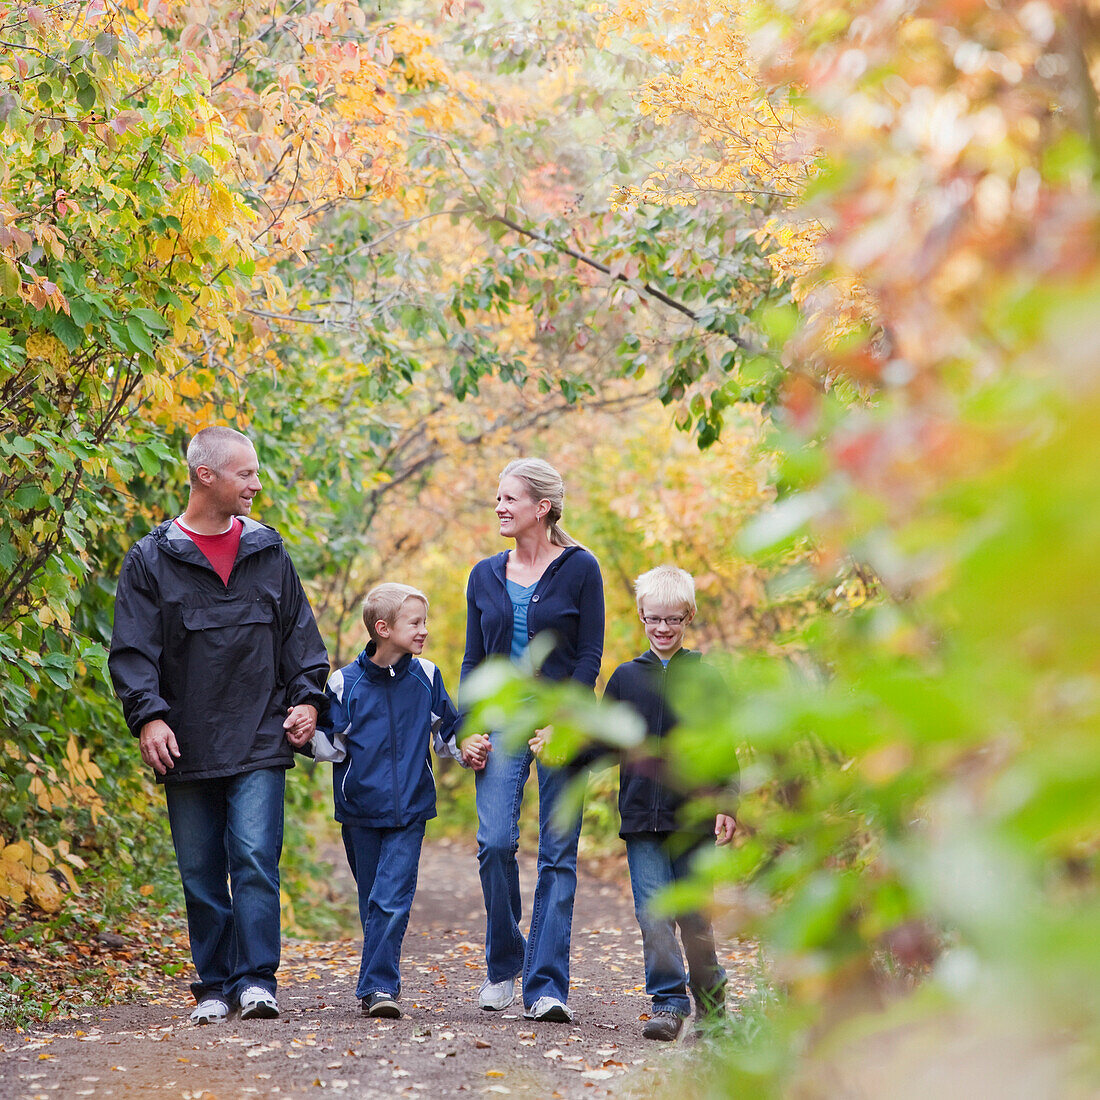 'Family Walking Together On A Path In A Park In Autumn; Edmonton, Alberta, Canada'